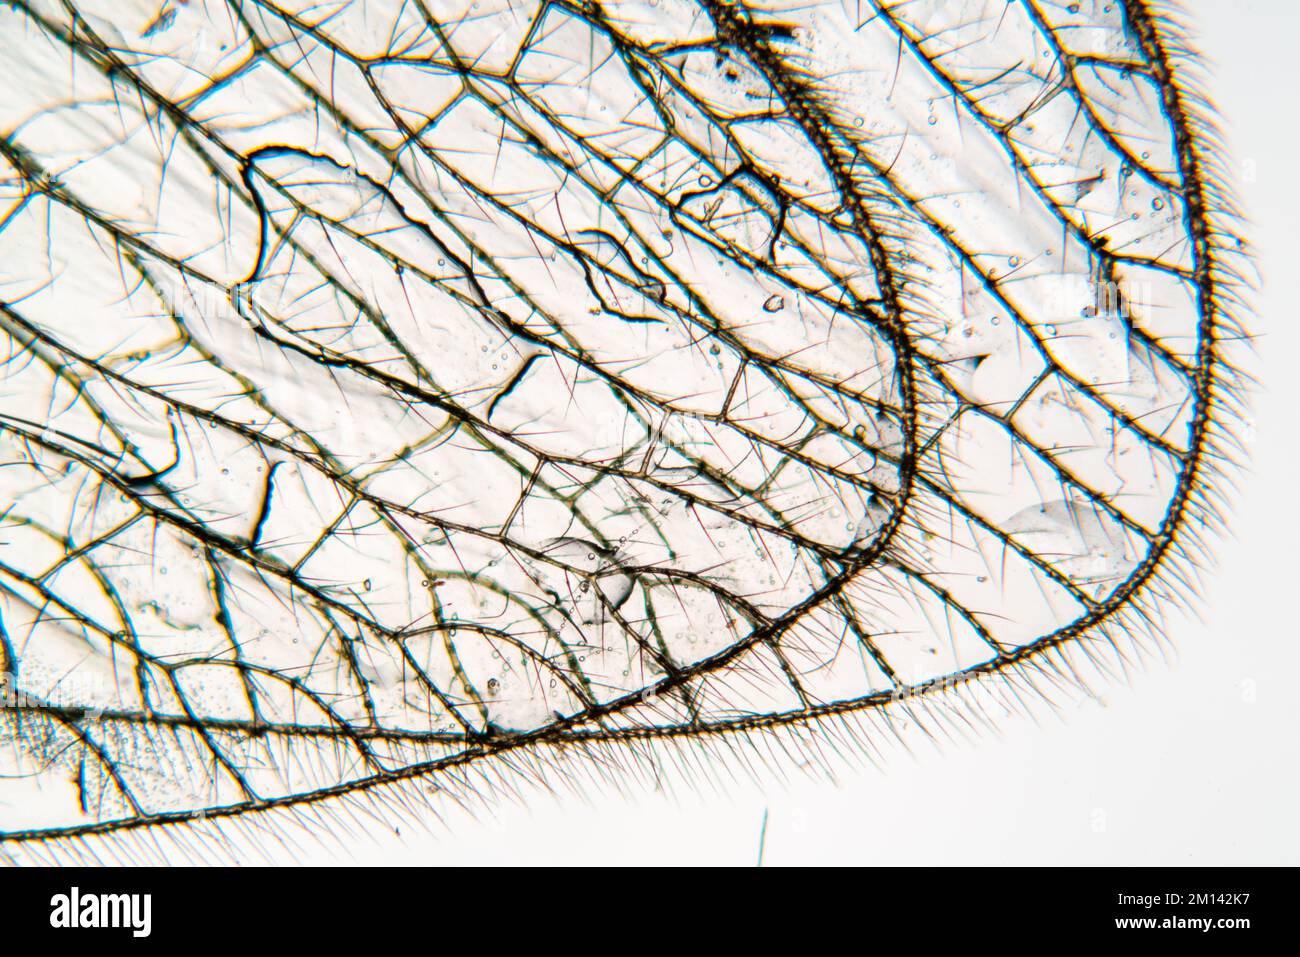 Insect wing, light micrograph Stock Photo